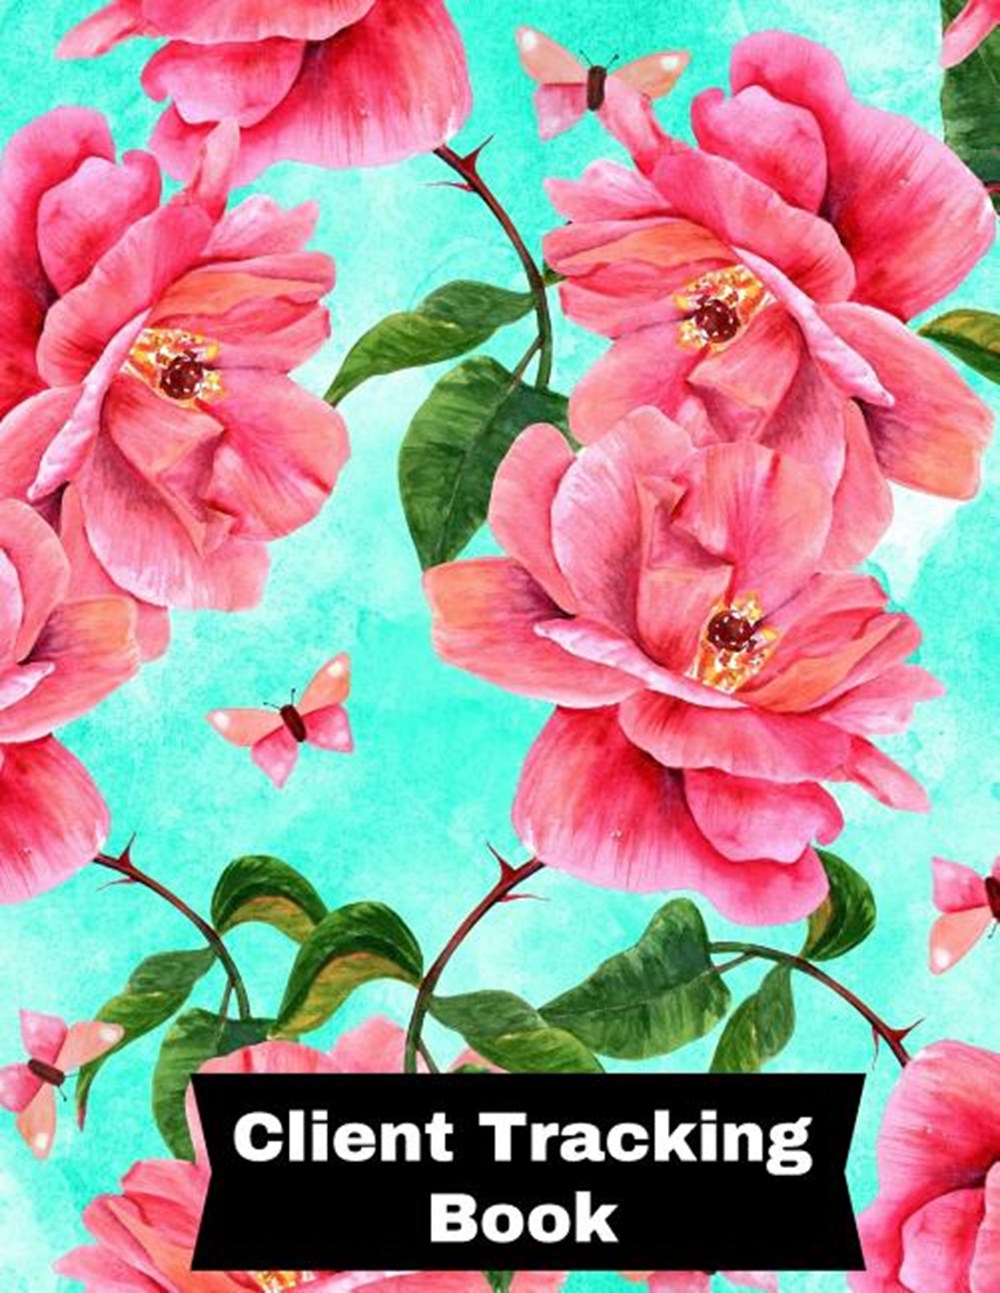 Client Tracking Book: Customer Appointment Management System - Log Book, Information Keeper, Record 